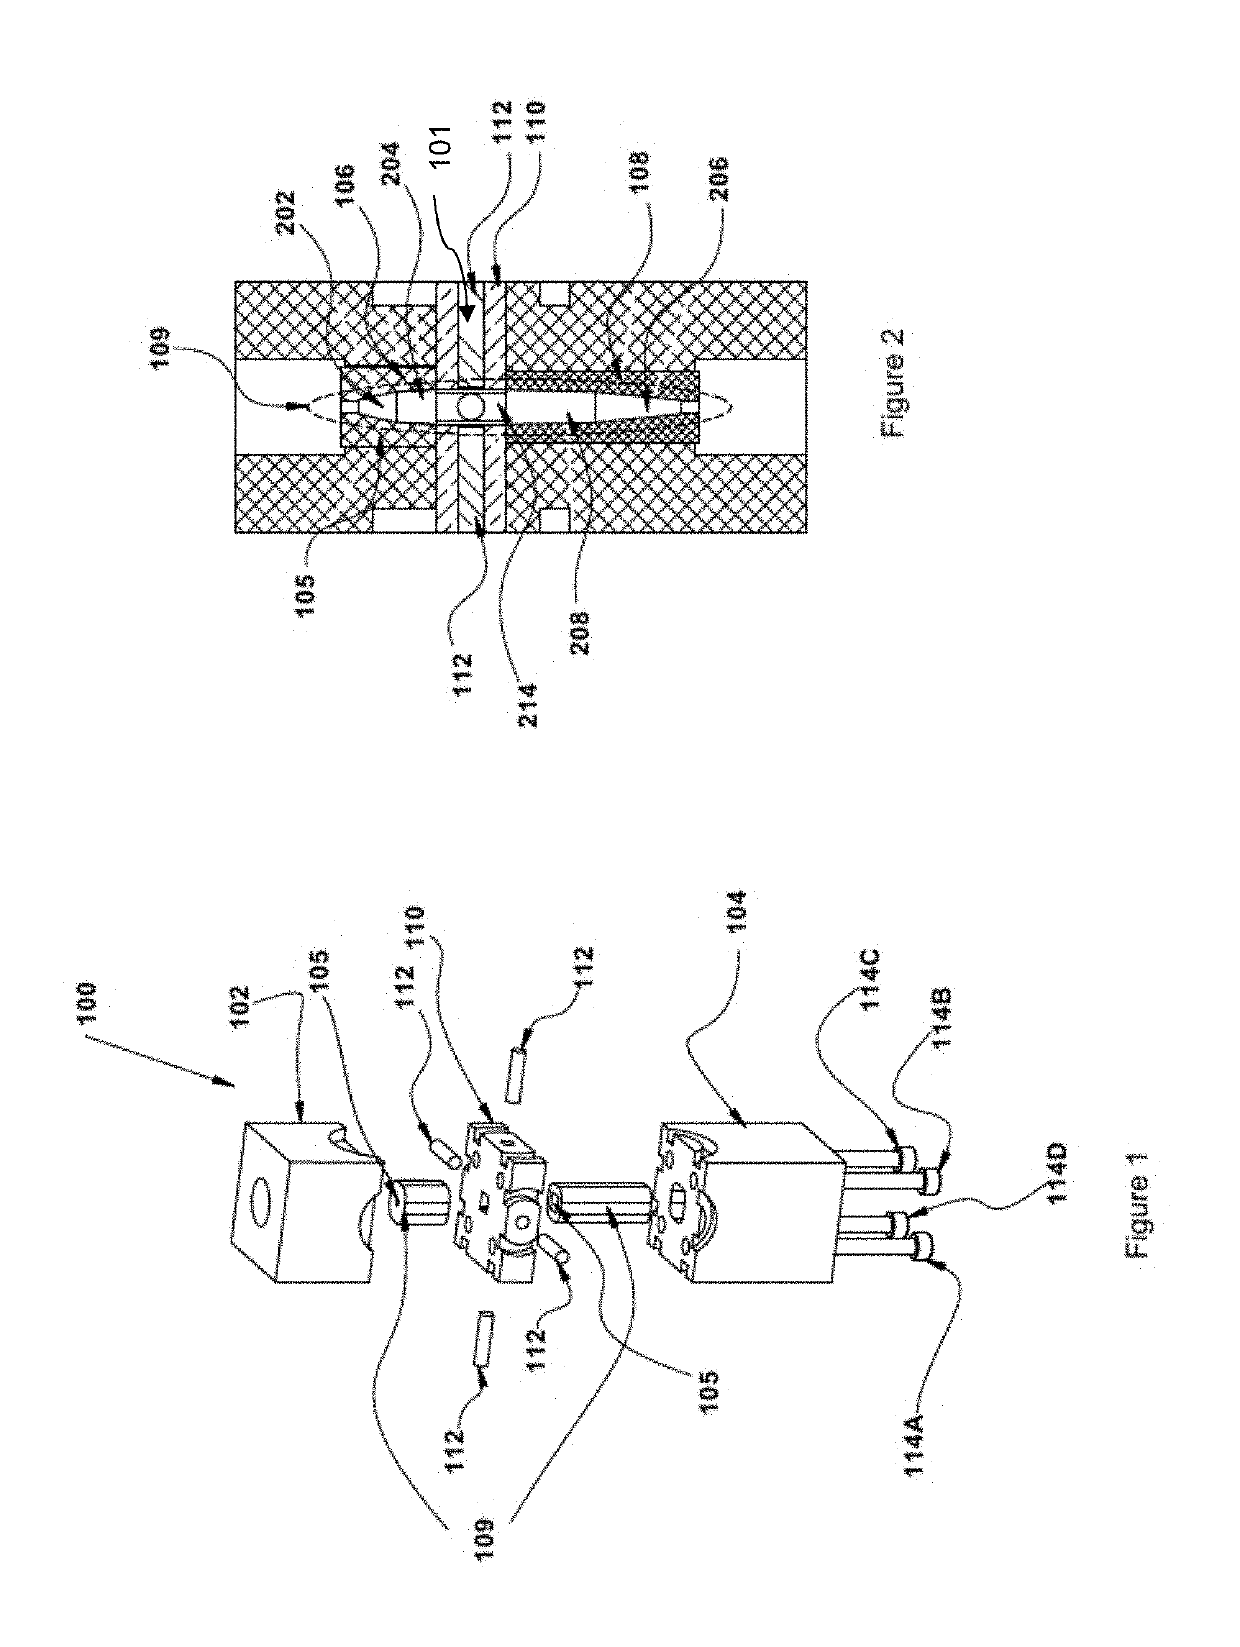 Medical device location and tracking system